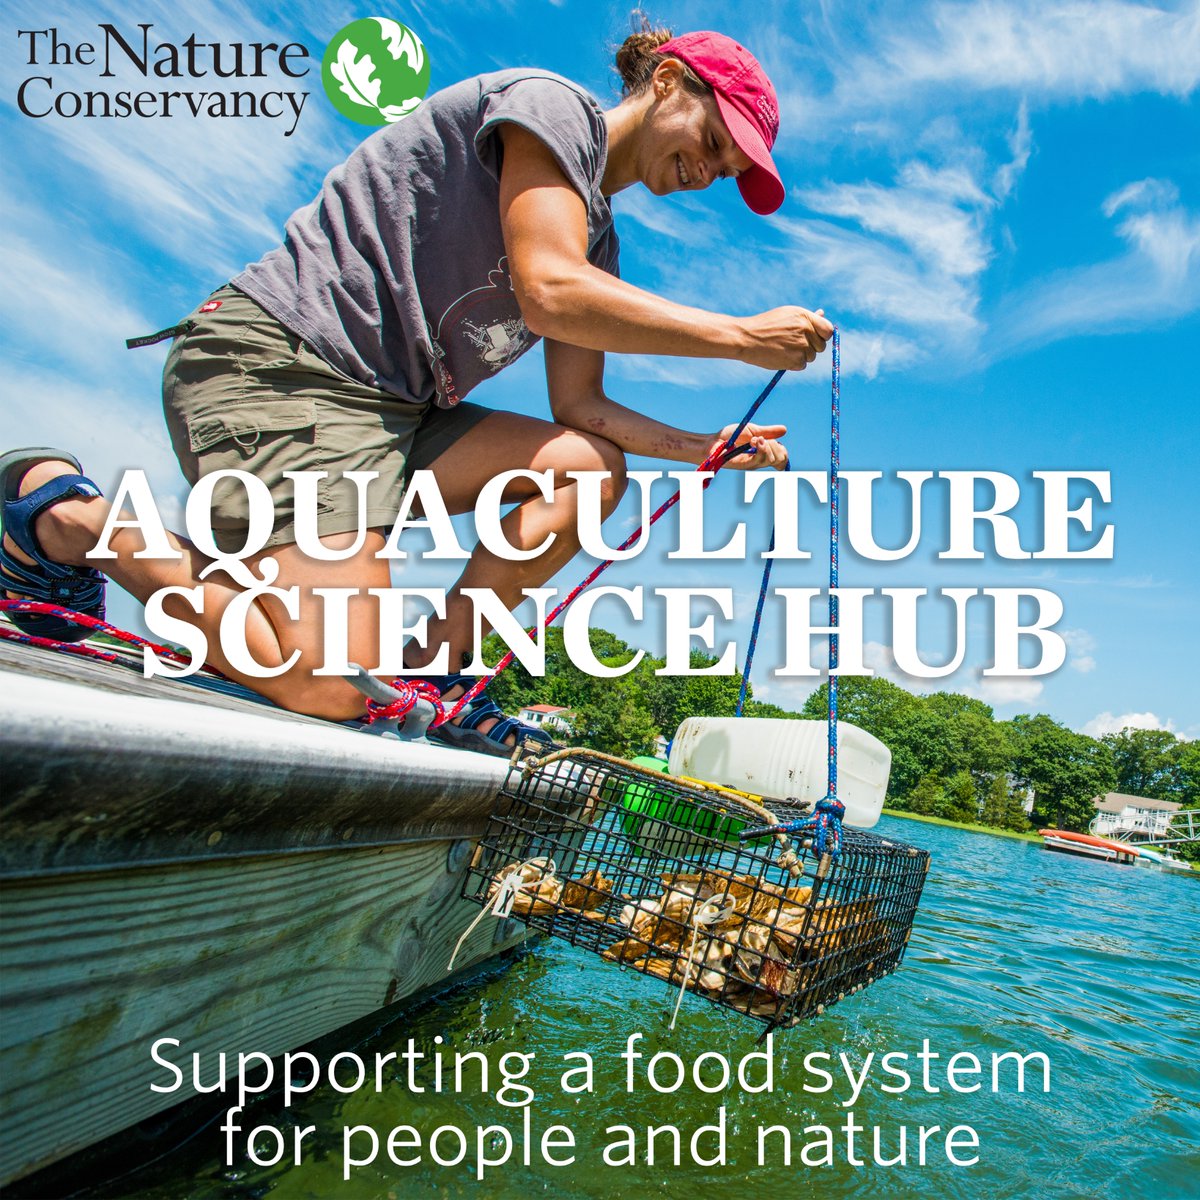 A nature-positive future for aquaculture is possible, with the right data and tools. The new Aquaculture Science Hub is a one-stop shop for the scientific resources to support the best outcomes for coastal communities and ecosystems around the world. aquaculturescience.org